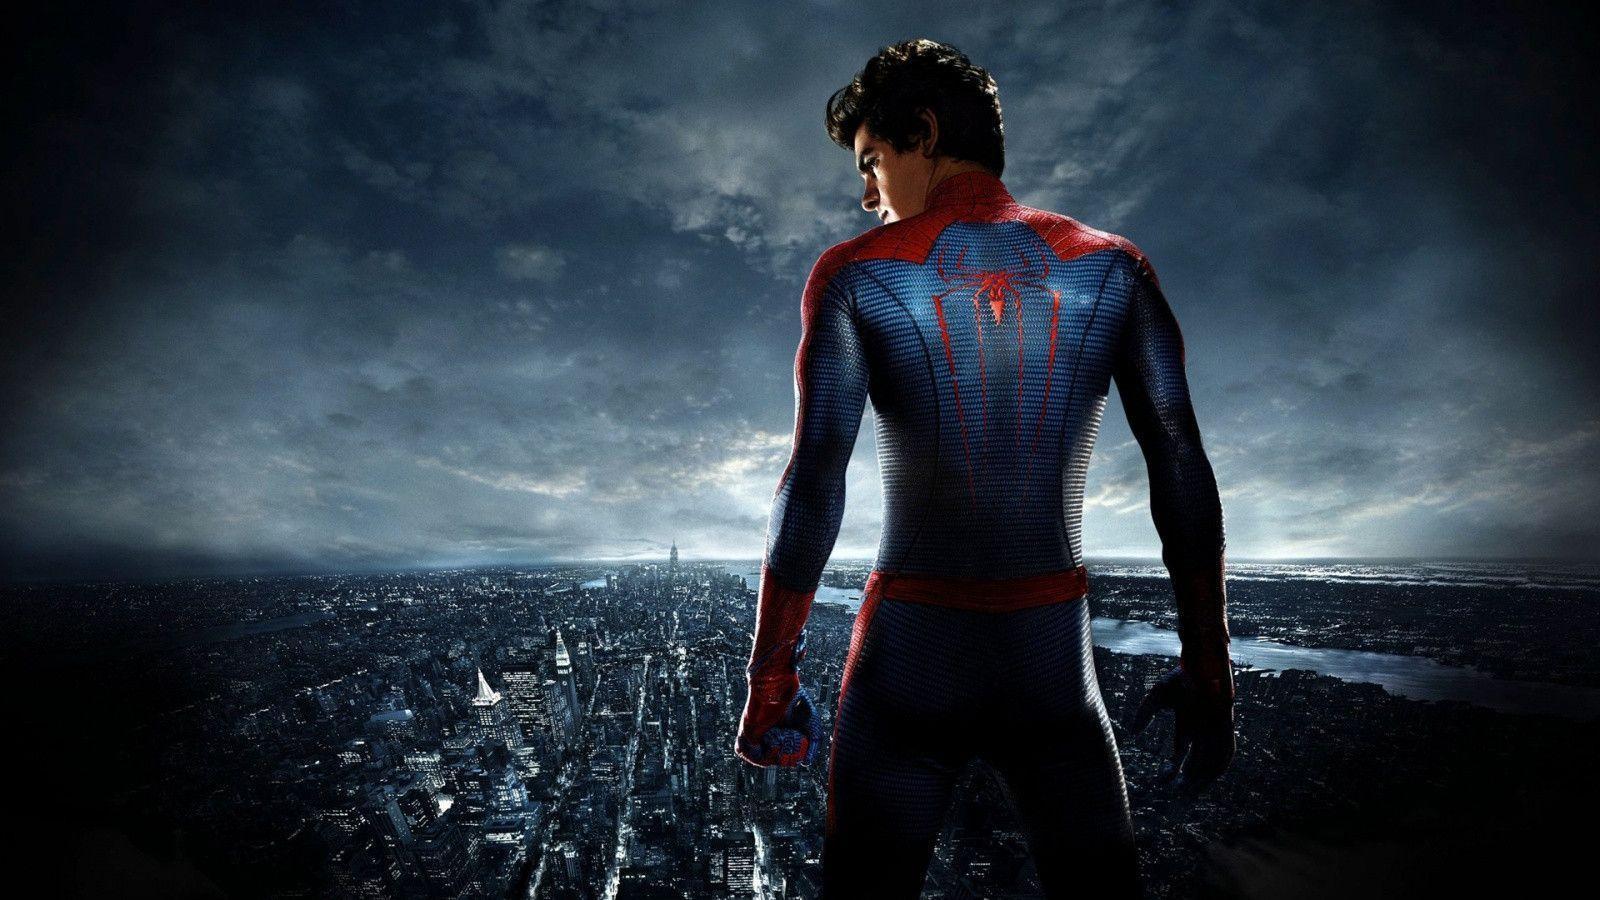 EVERY THING HD WALLPAPERS: Spiderman New HD Wallpaper 2013